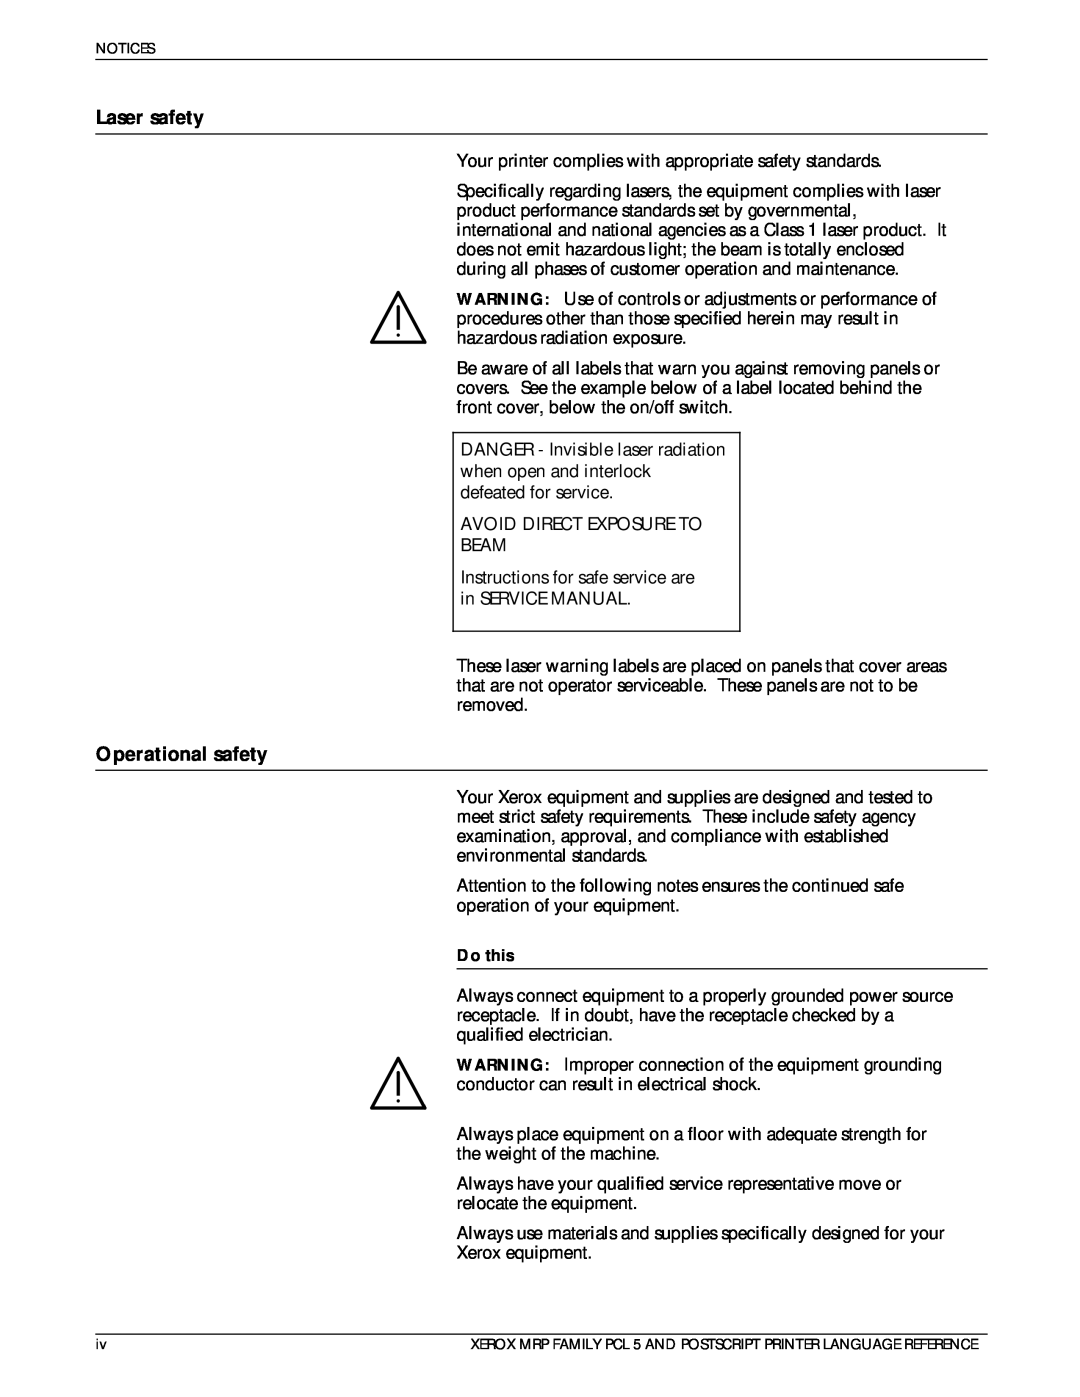 Xerox 4215/MRP manual Laser safety, Operational safety, Do this 